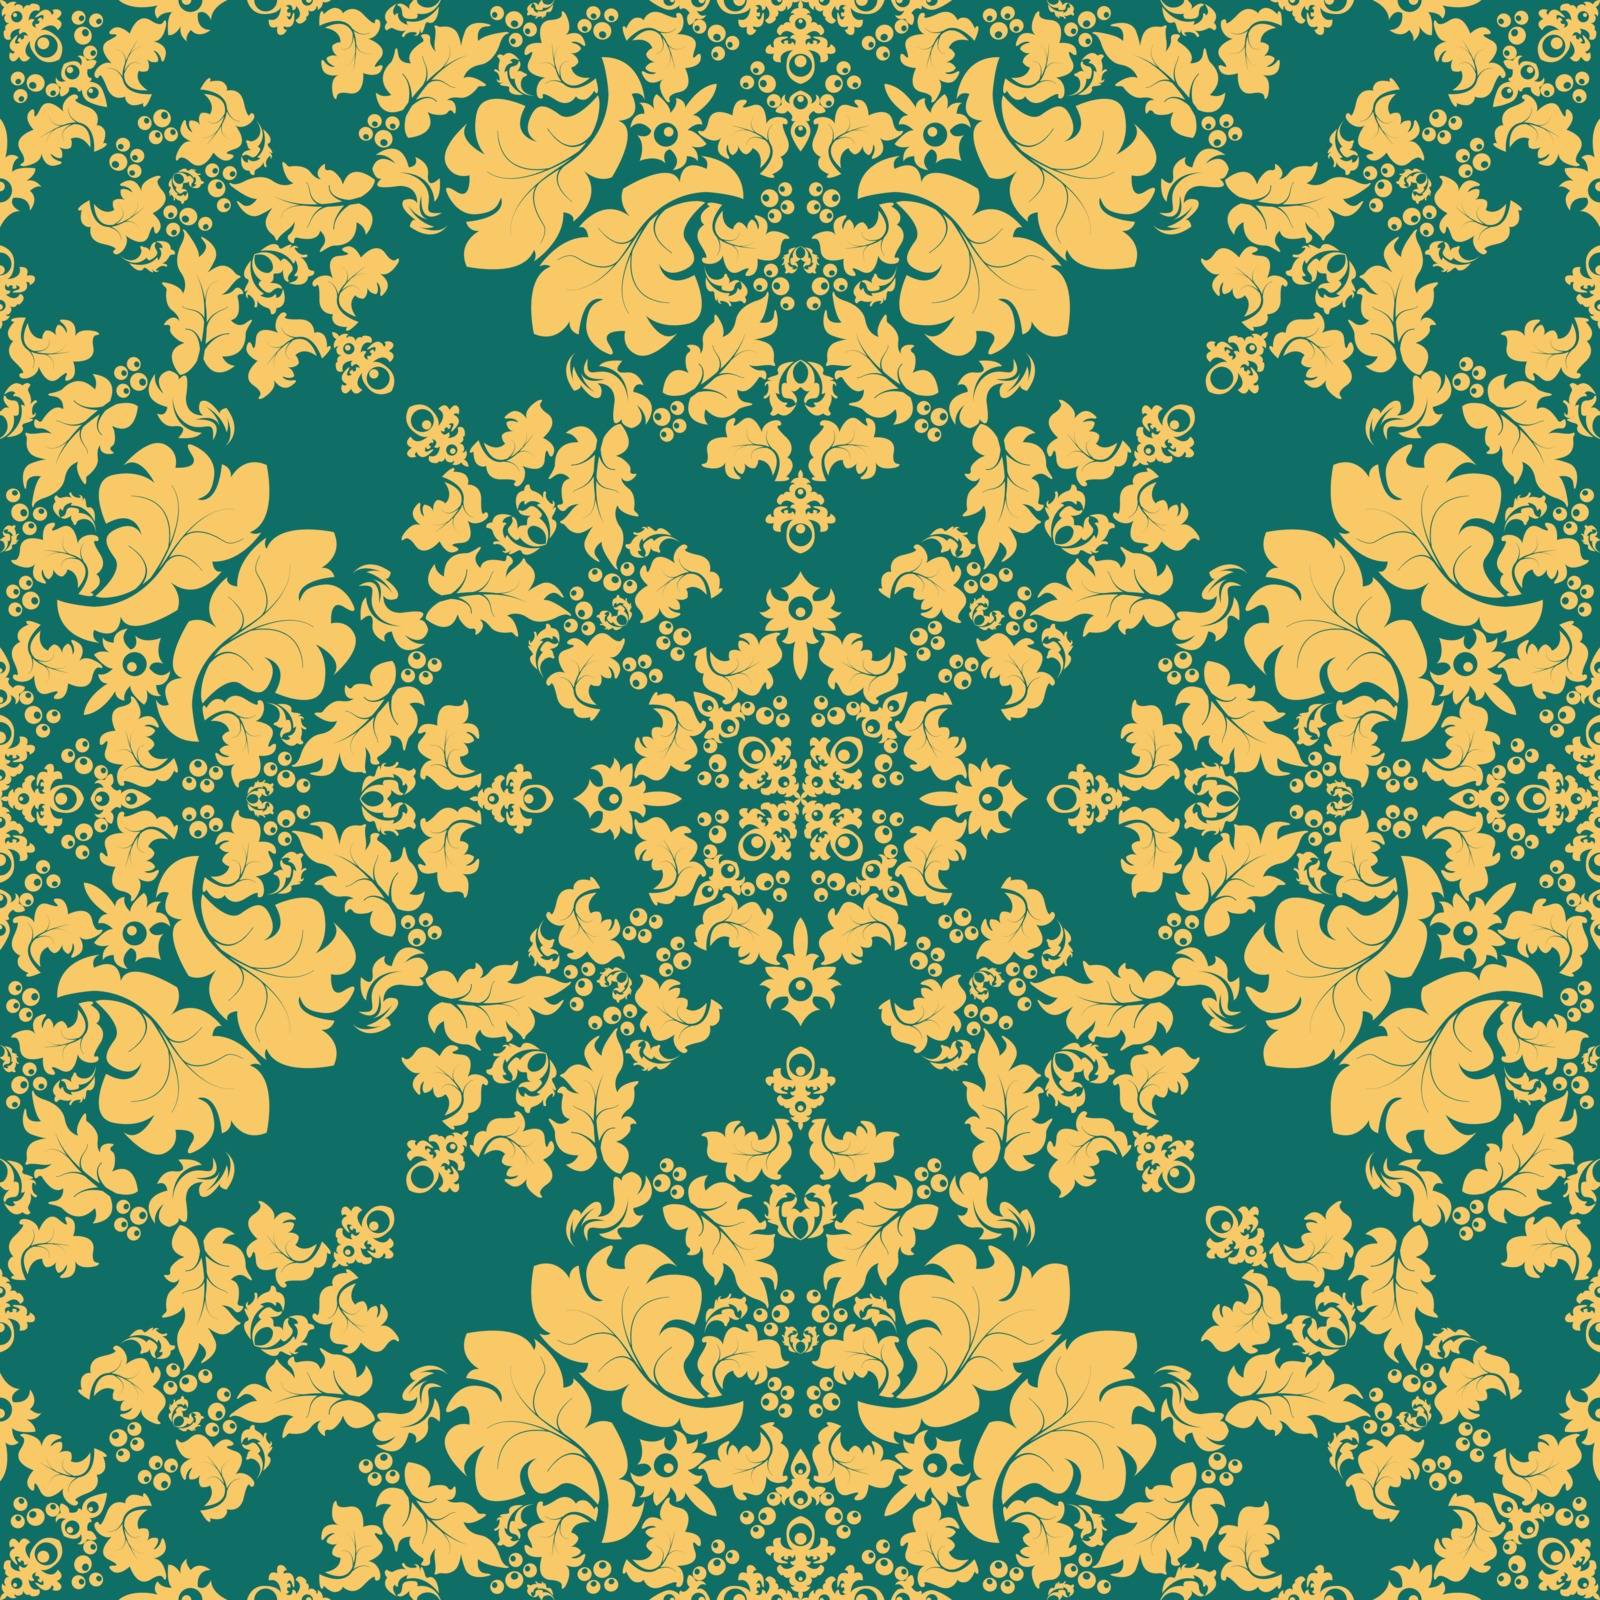 Wallpaper in the style of Baroque.  by Graffiti21